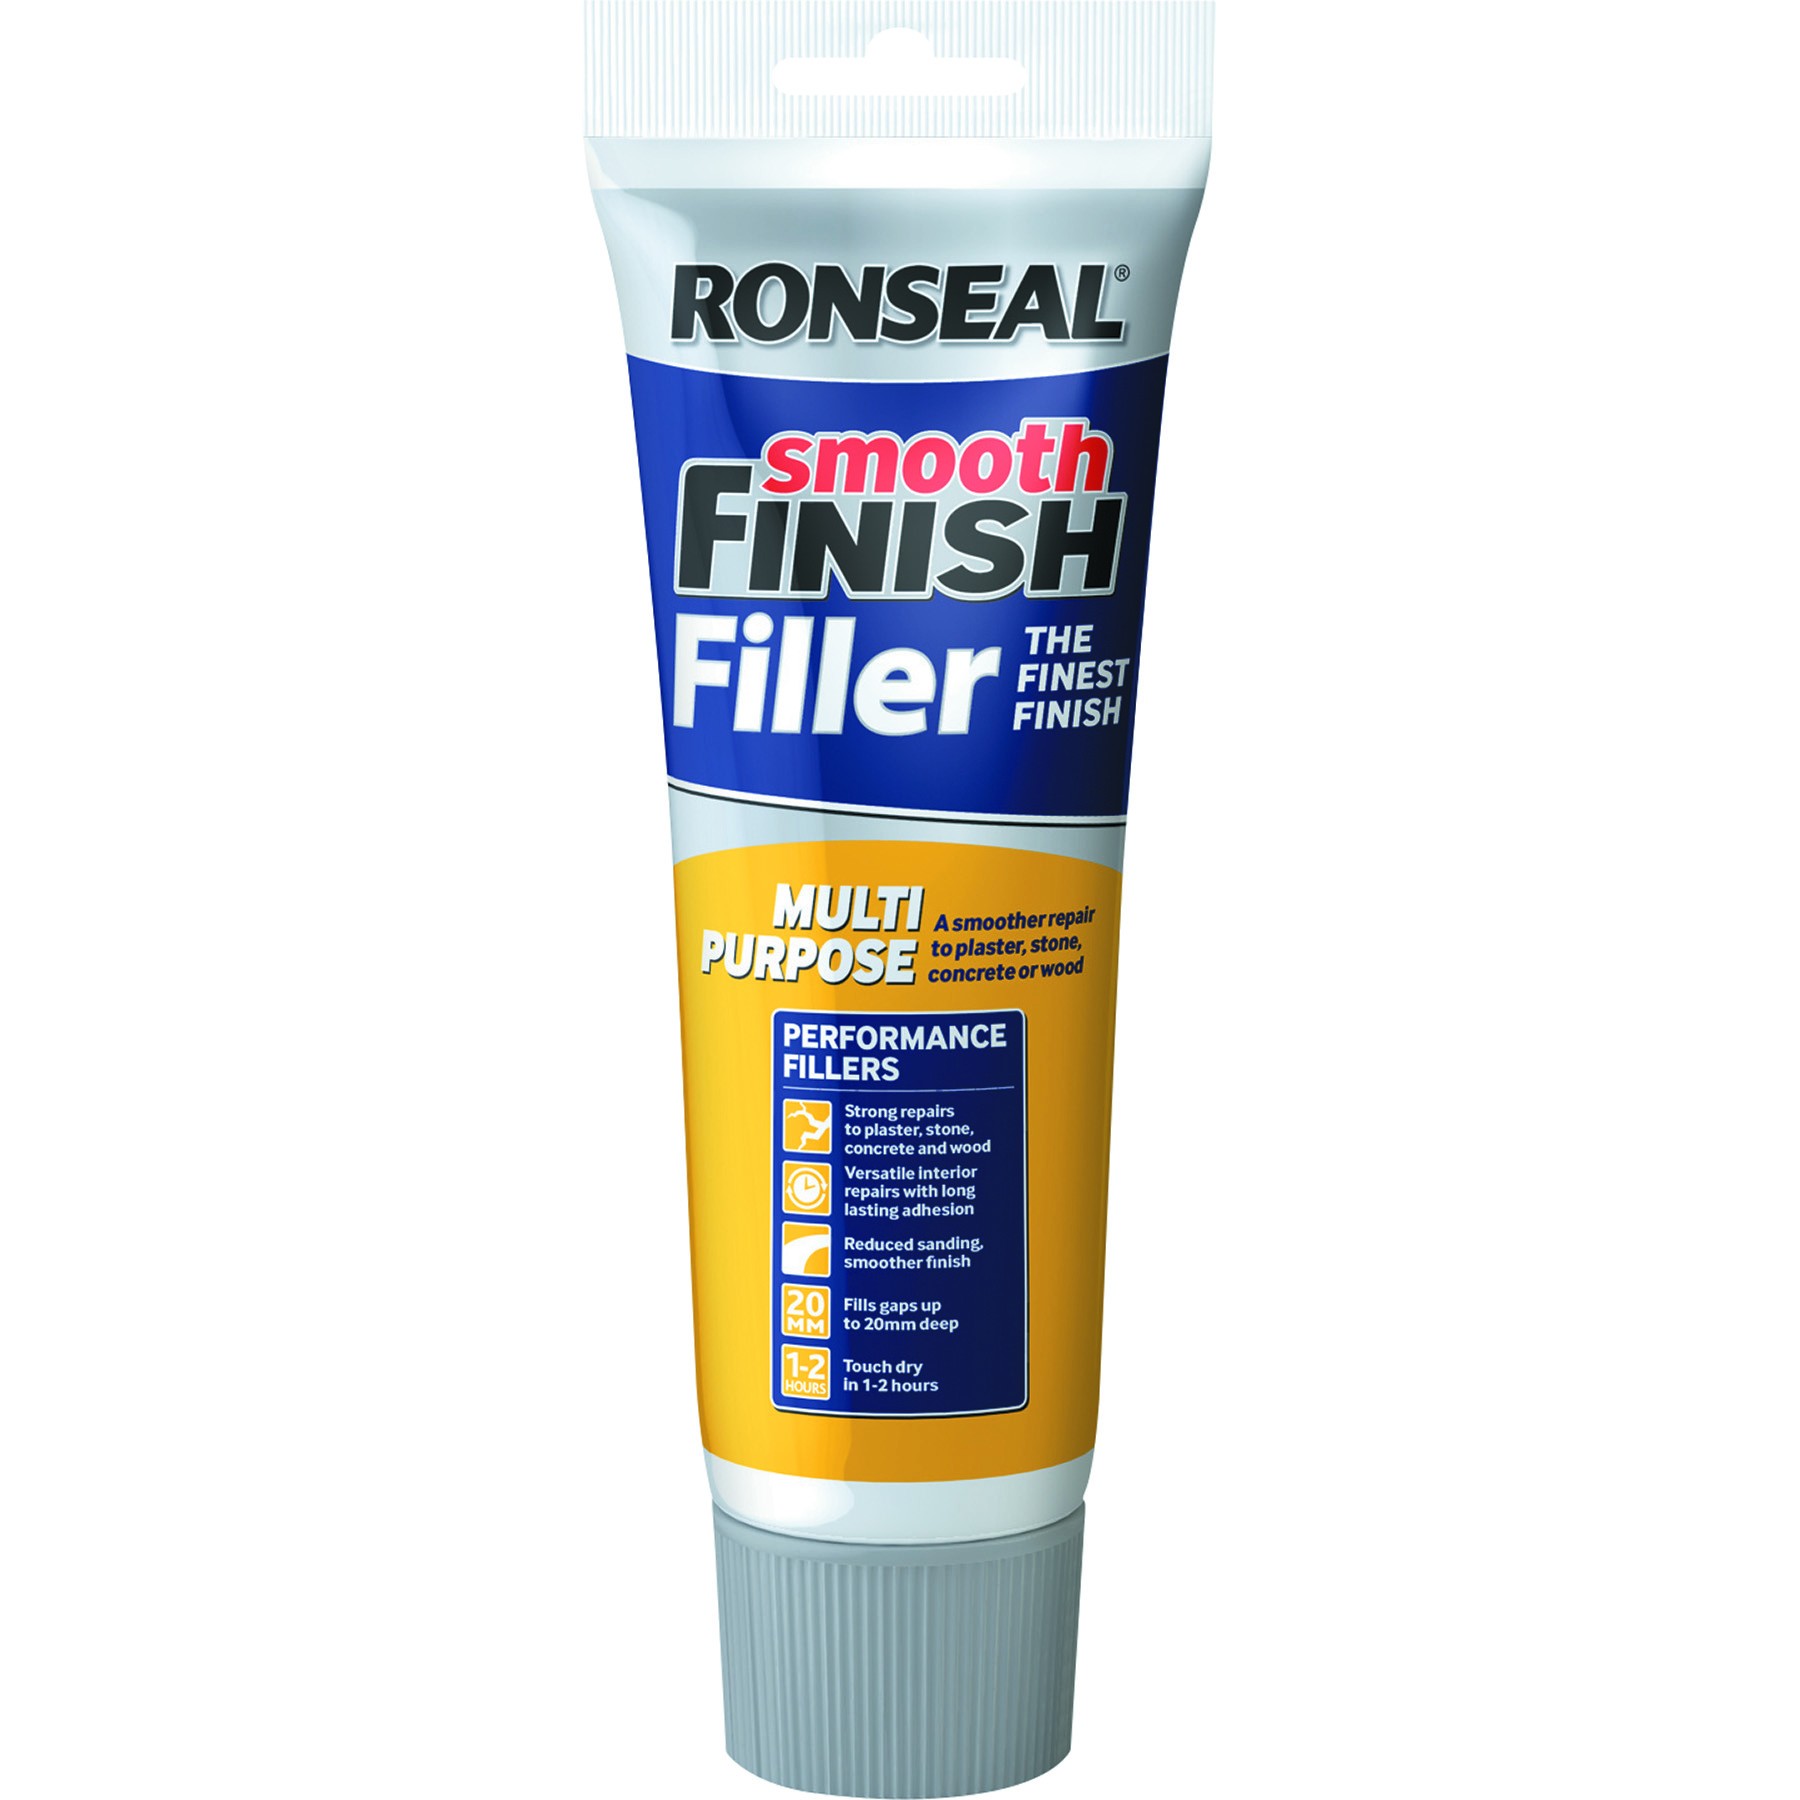 Ronseal Smooth Finish Multi Purpose Ready Mix Wall Filler 330g [RONS36544]